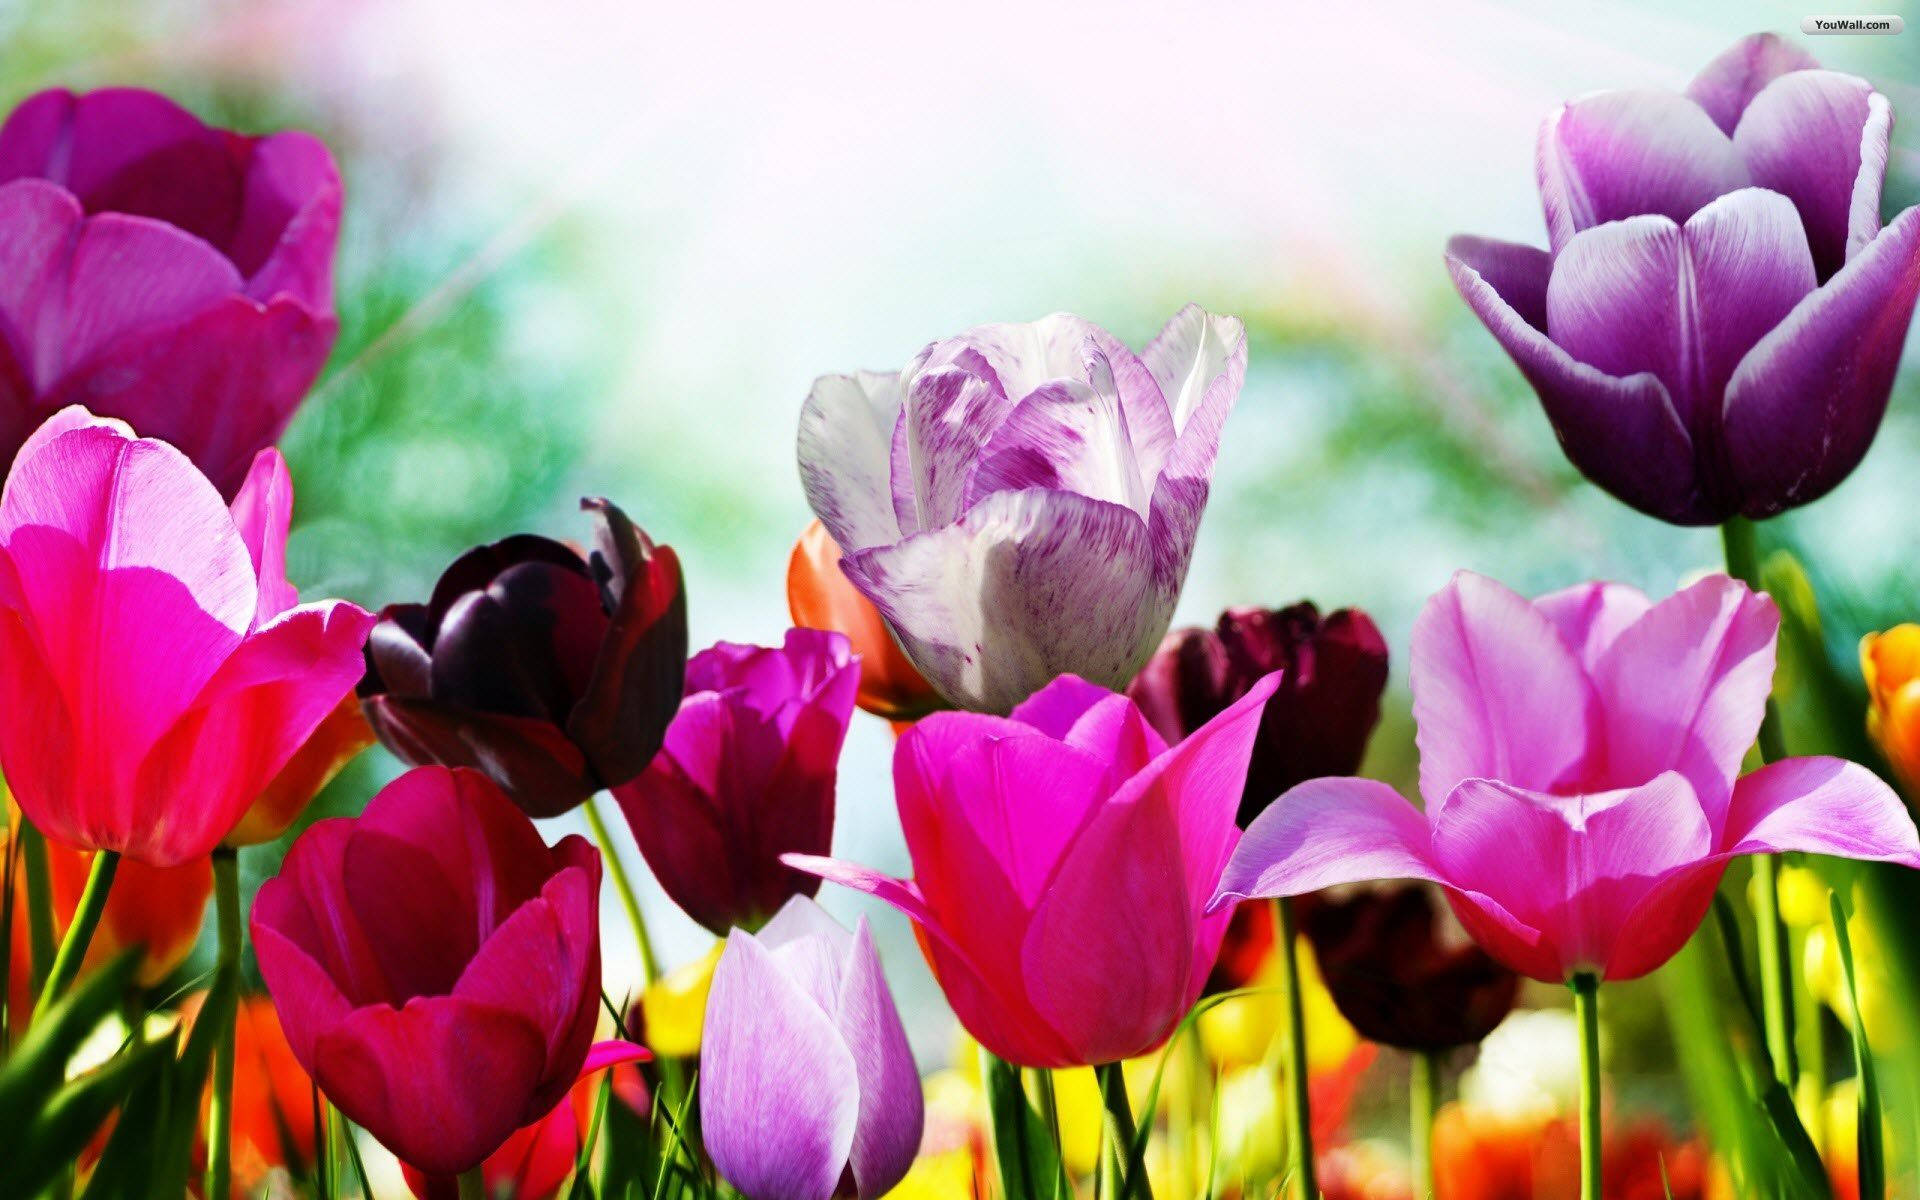 Tulip painting brings the beauty of spring to your desktop Wallpaper